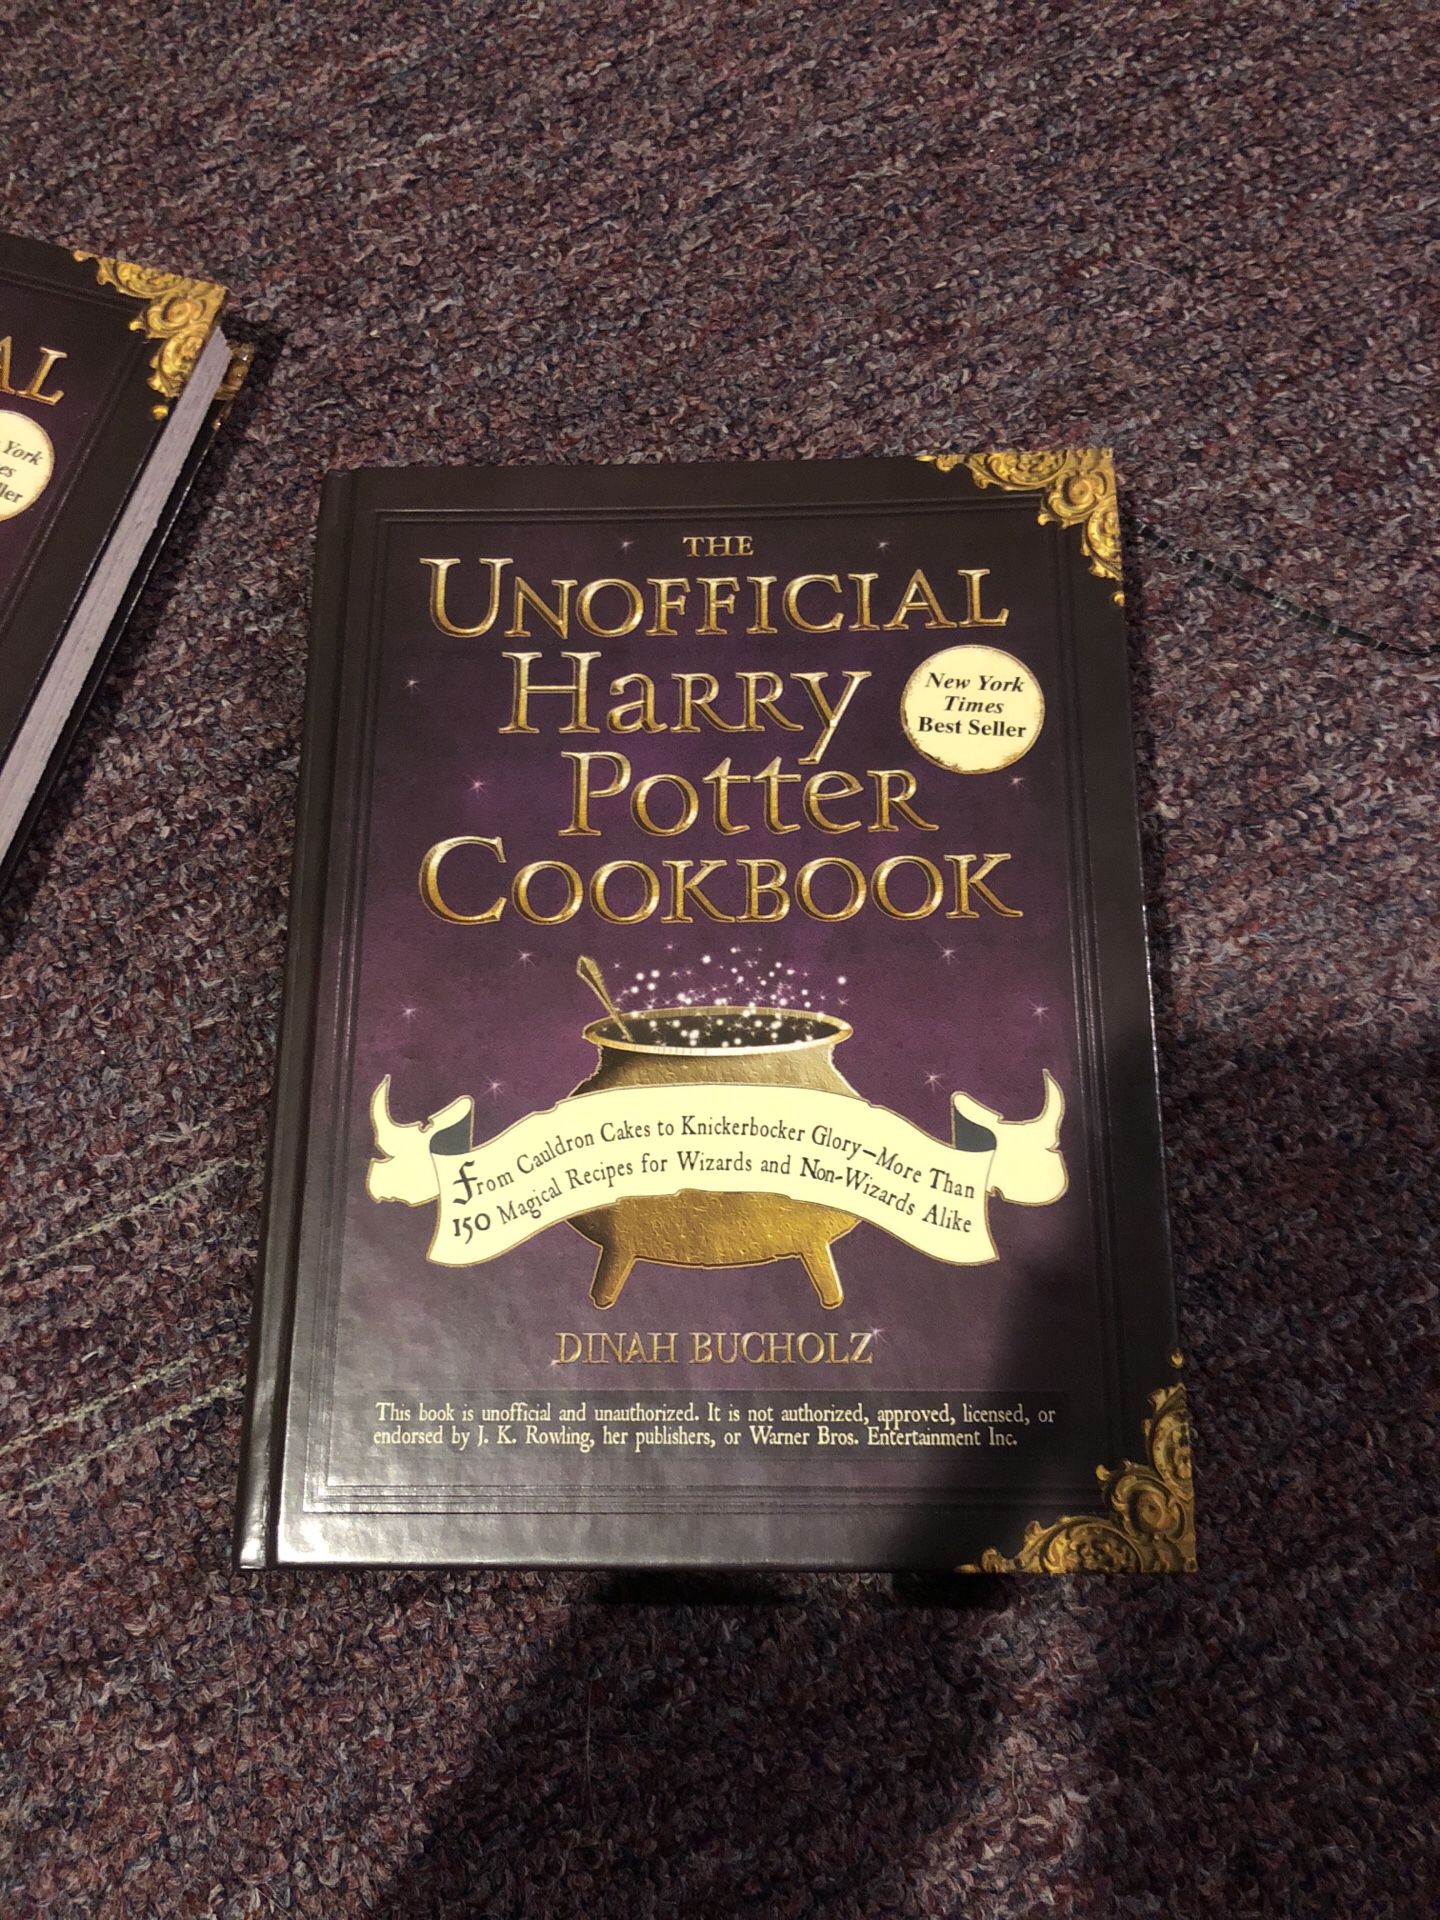 The unofficial Harry Potter cookbook